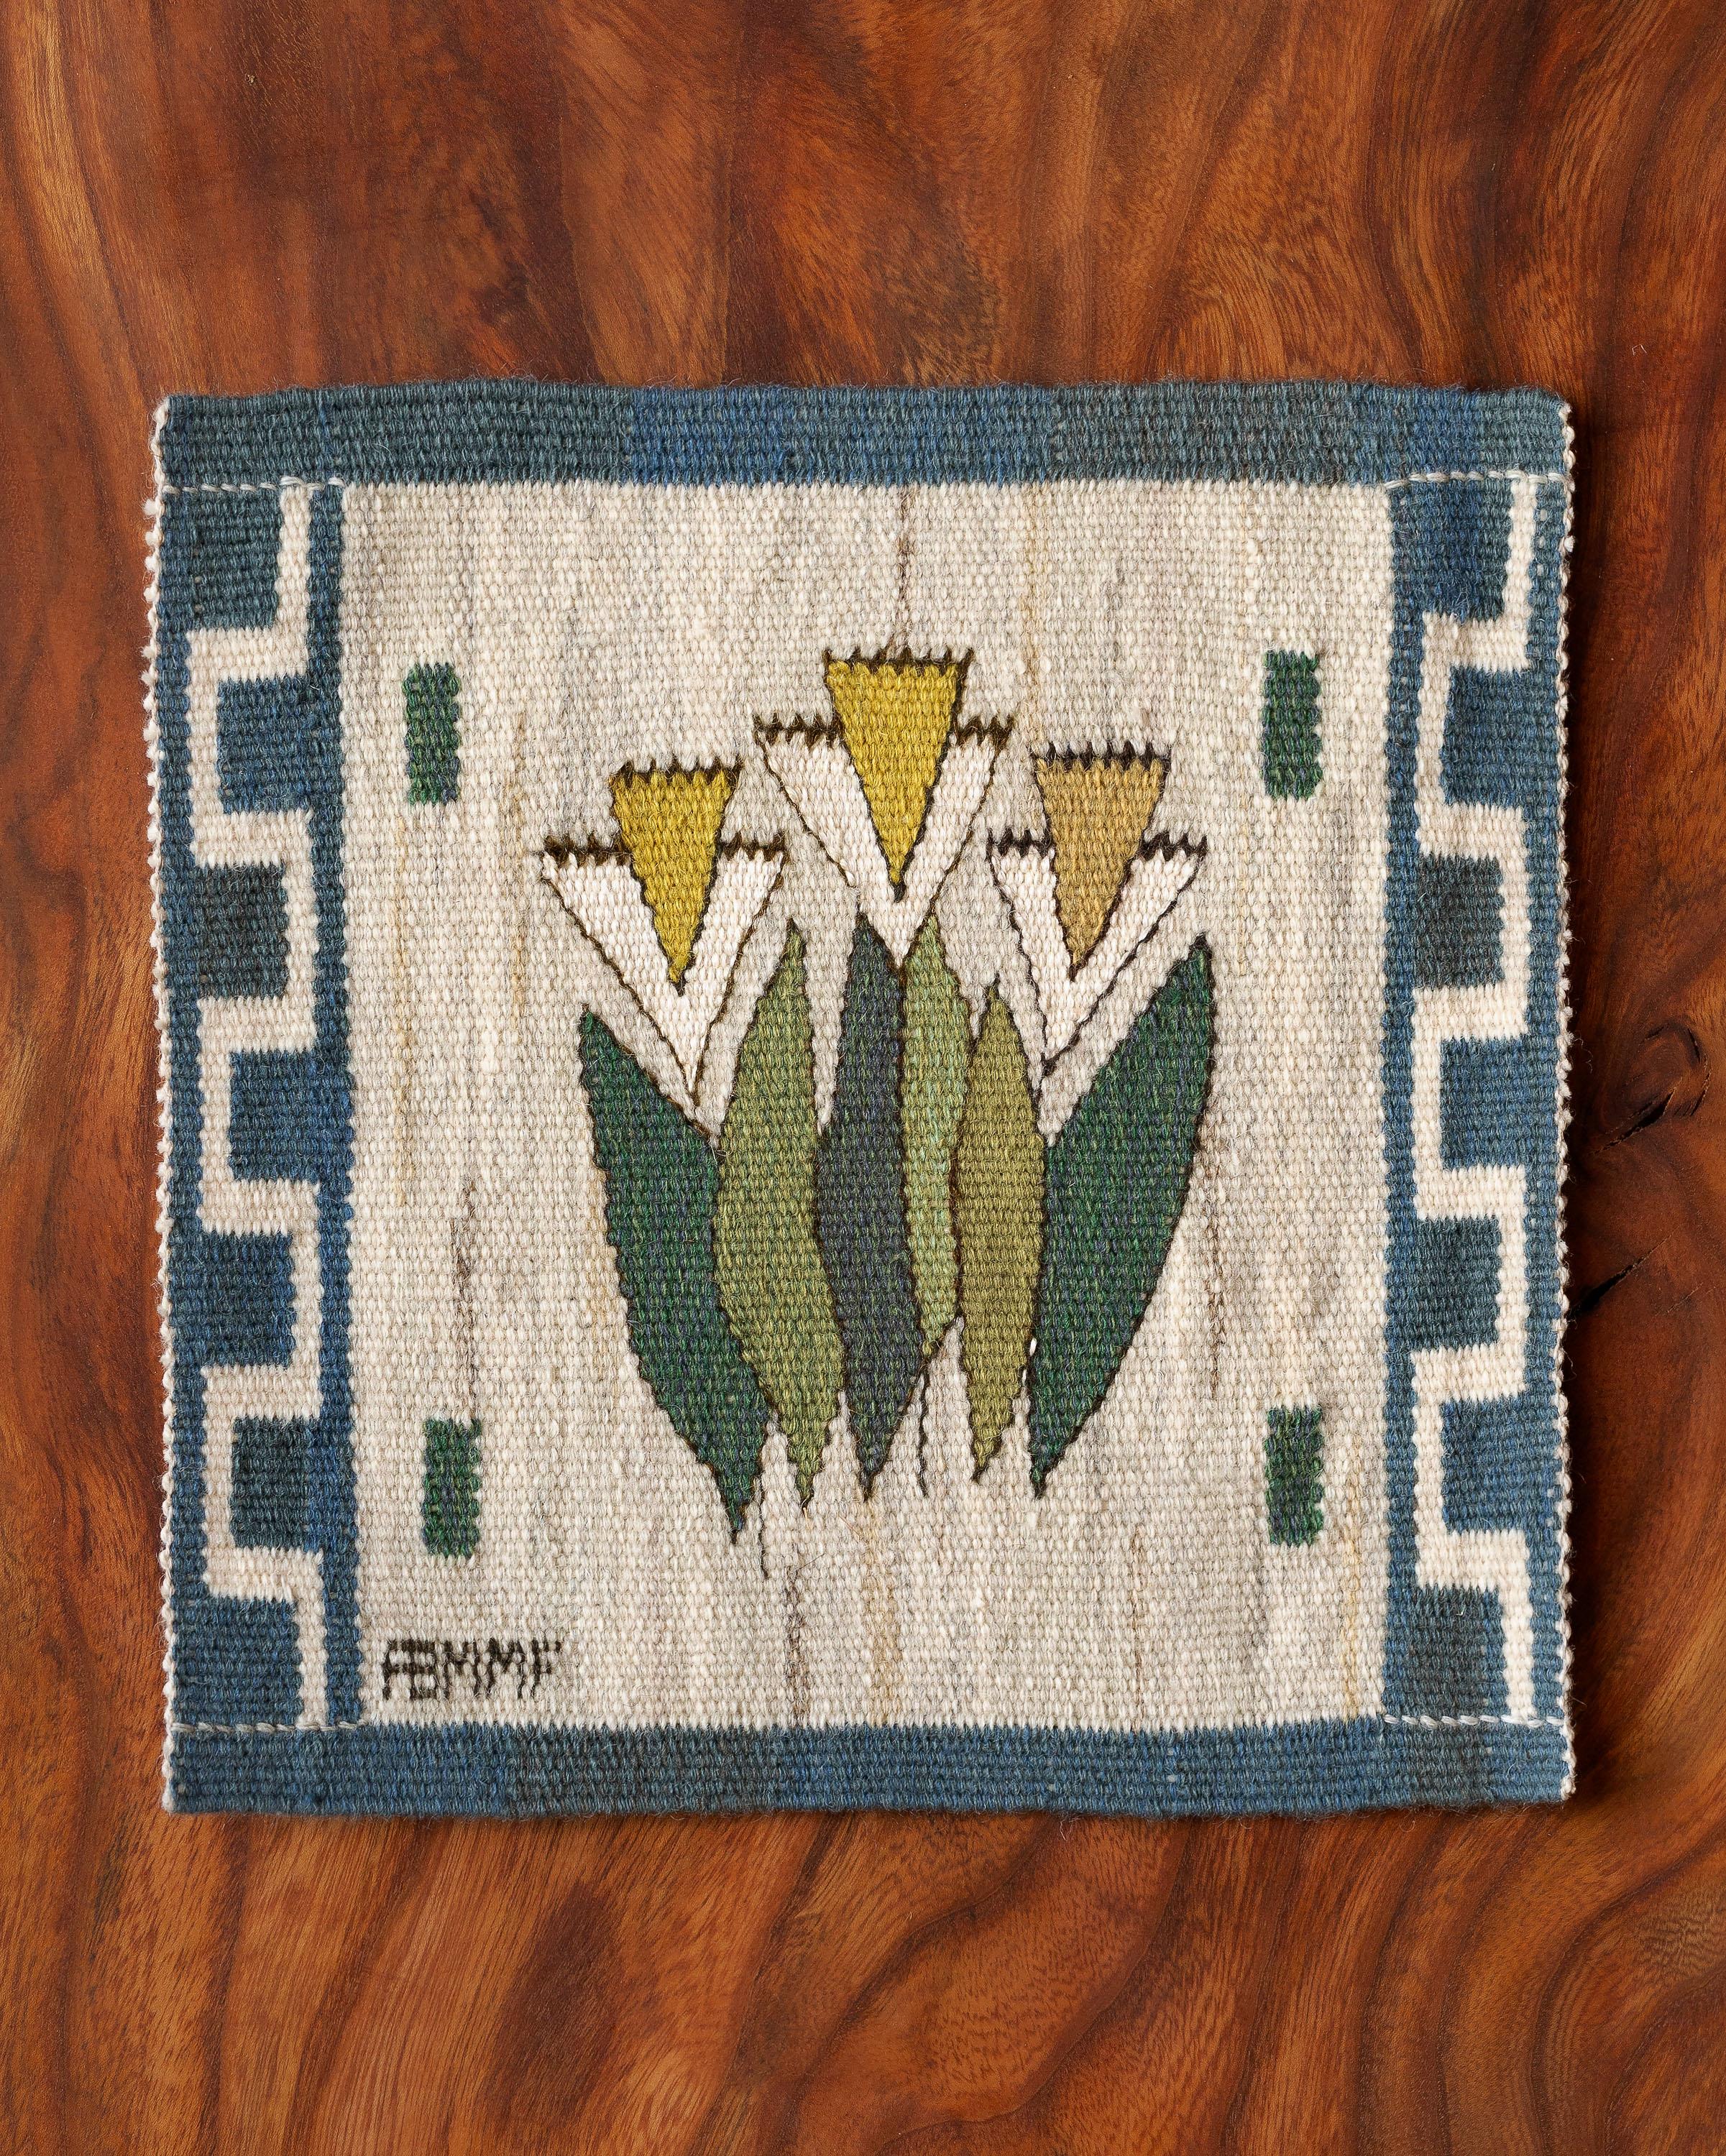 Handwoven tapestry with narcissus flowers, designed by Märta Måås-Fjetterström in 1939. 

Woven in wool on a wool warp and at the Märta Måås-Fjetterström studio in Båstad, Sweden. 

The tapestry can be framed, mounted as a decorative pillow, or used